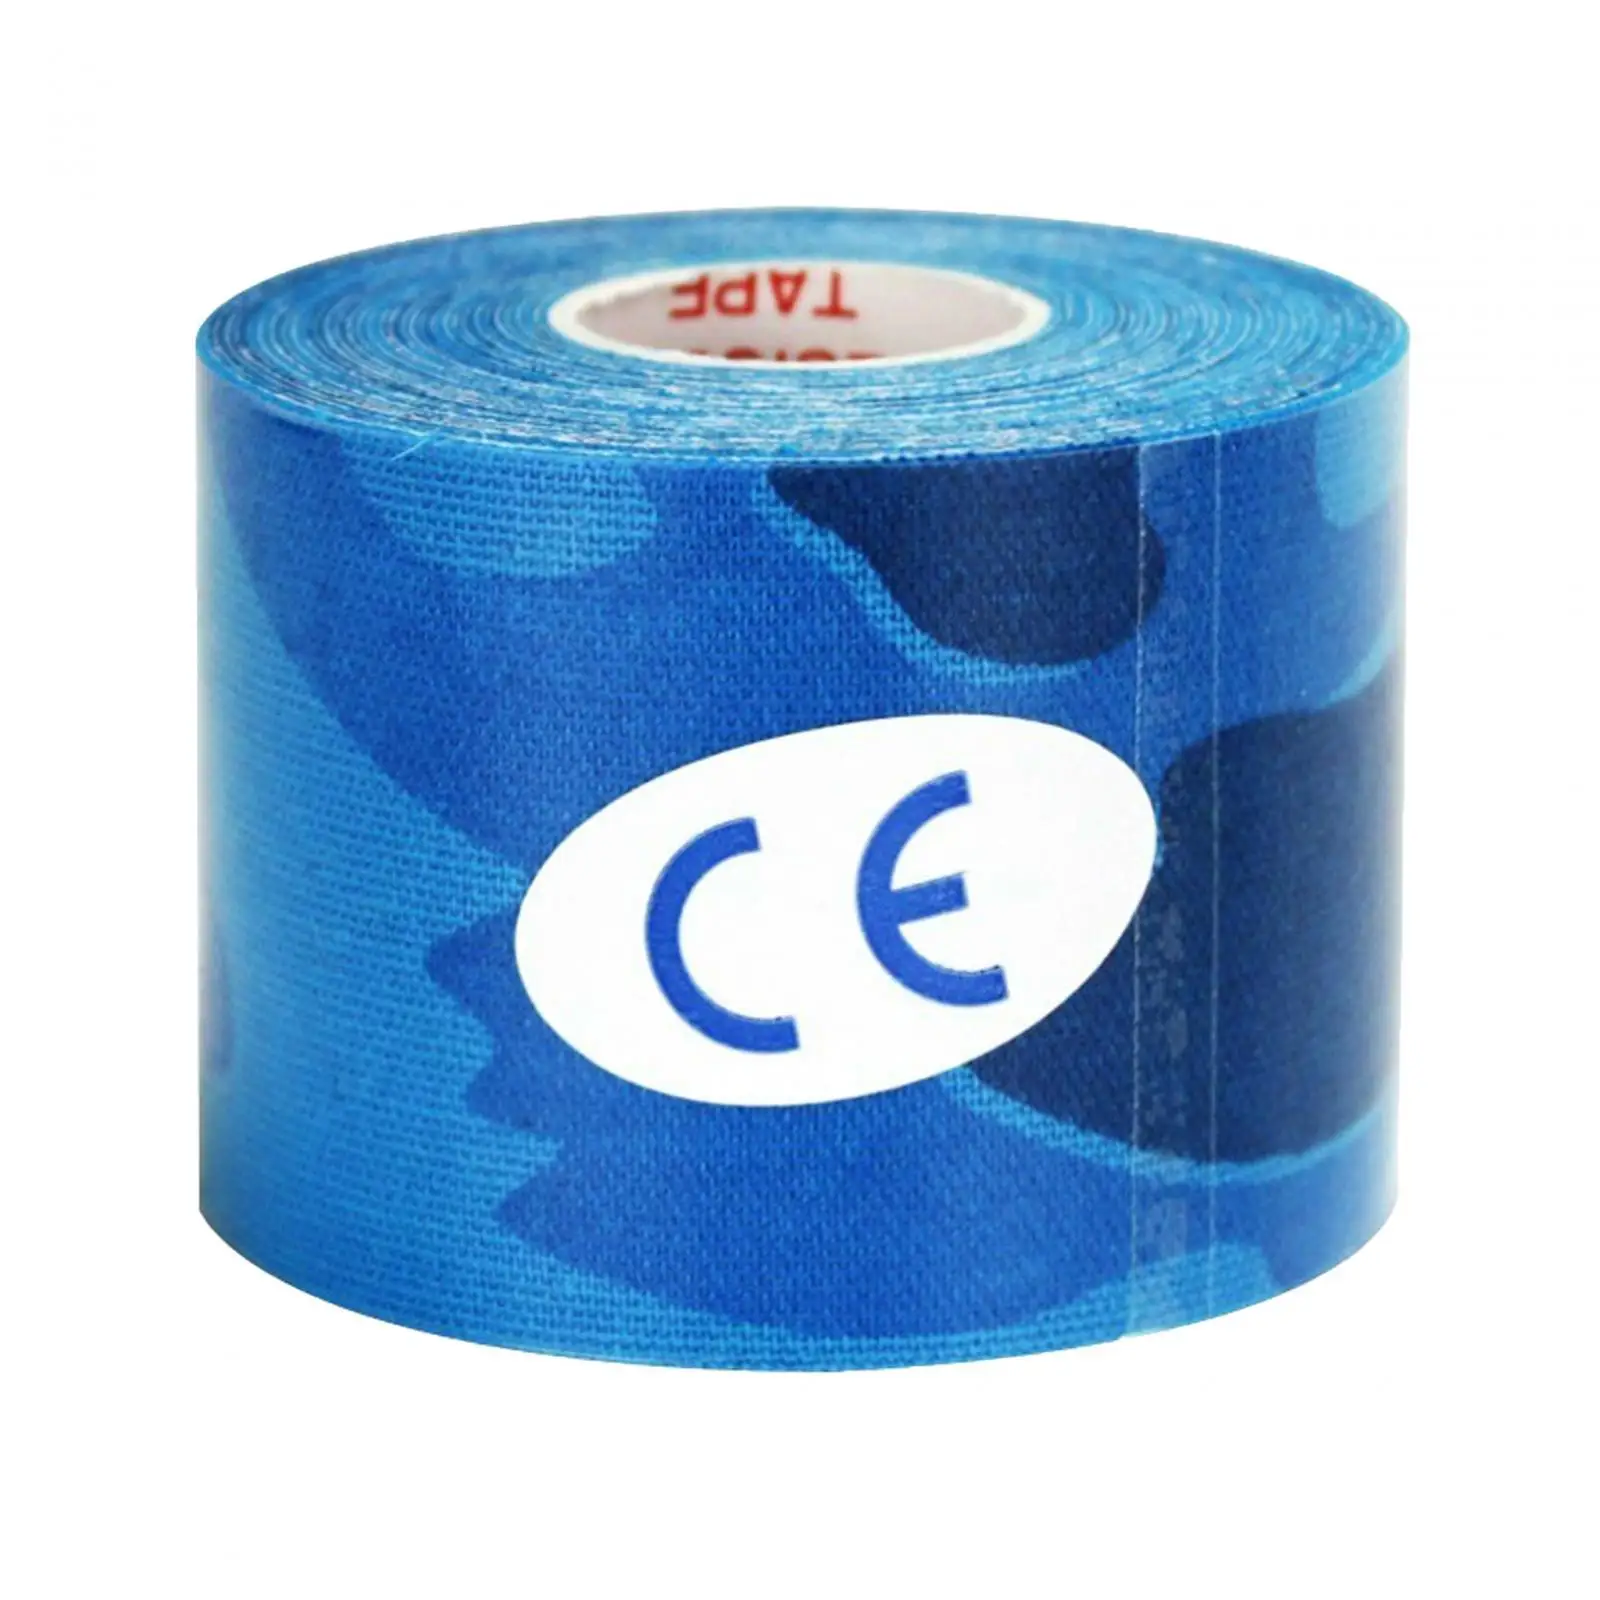 Athletic Tape Elastic Water Resistant Breathable No Sticky Muscle Tape 5M Roll Protective Tape for Knee Joint Wrist Ankle Gym